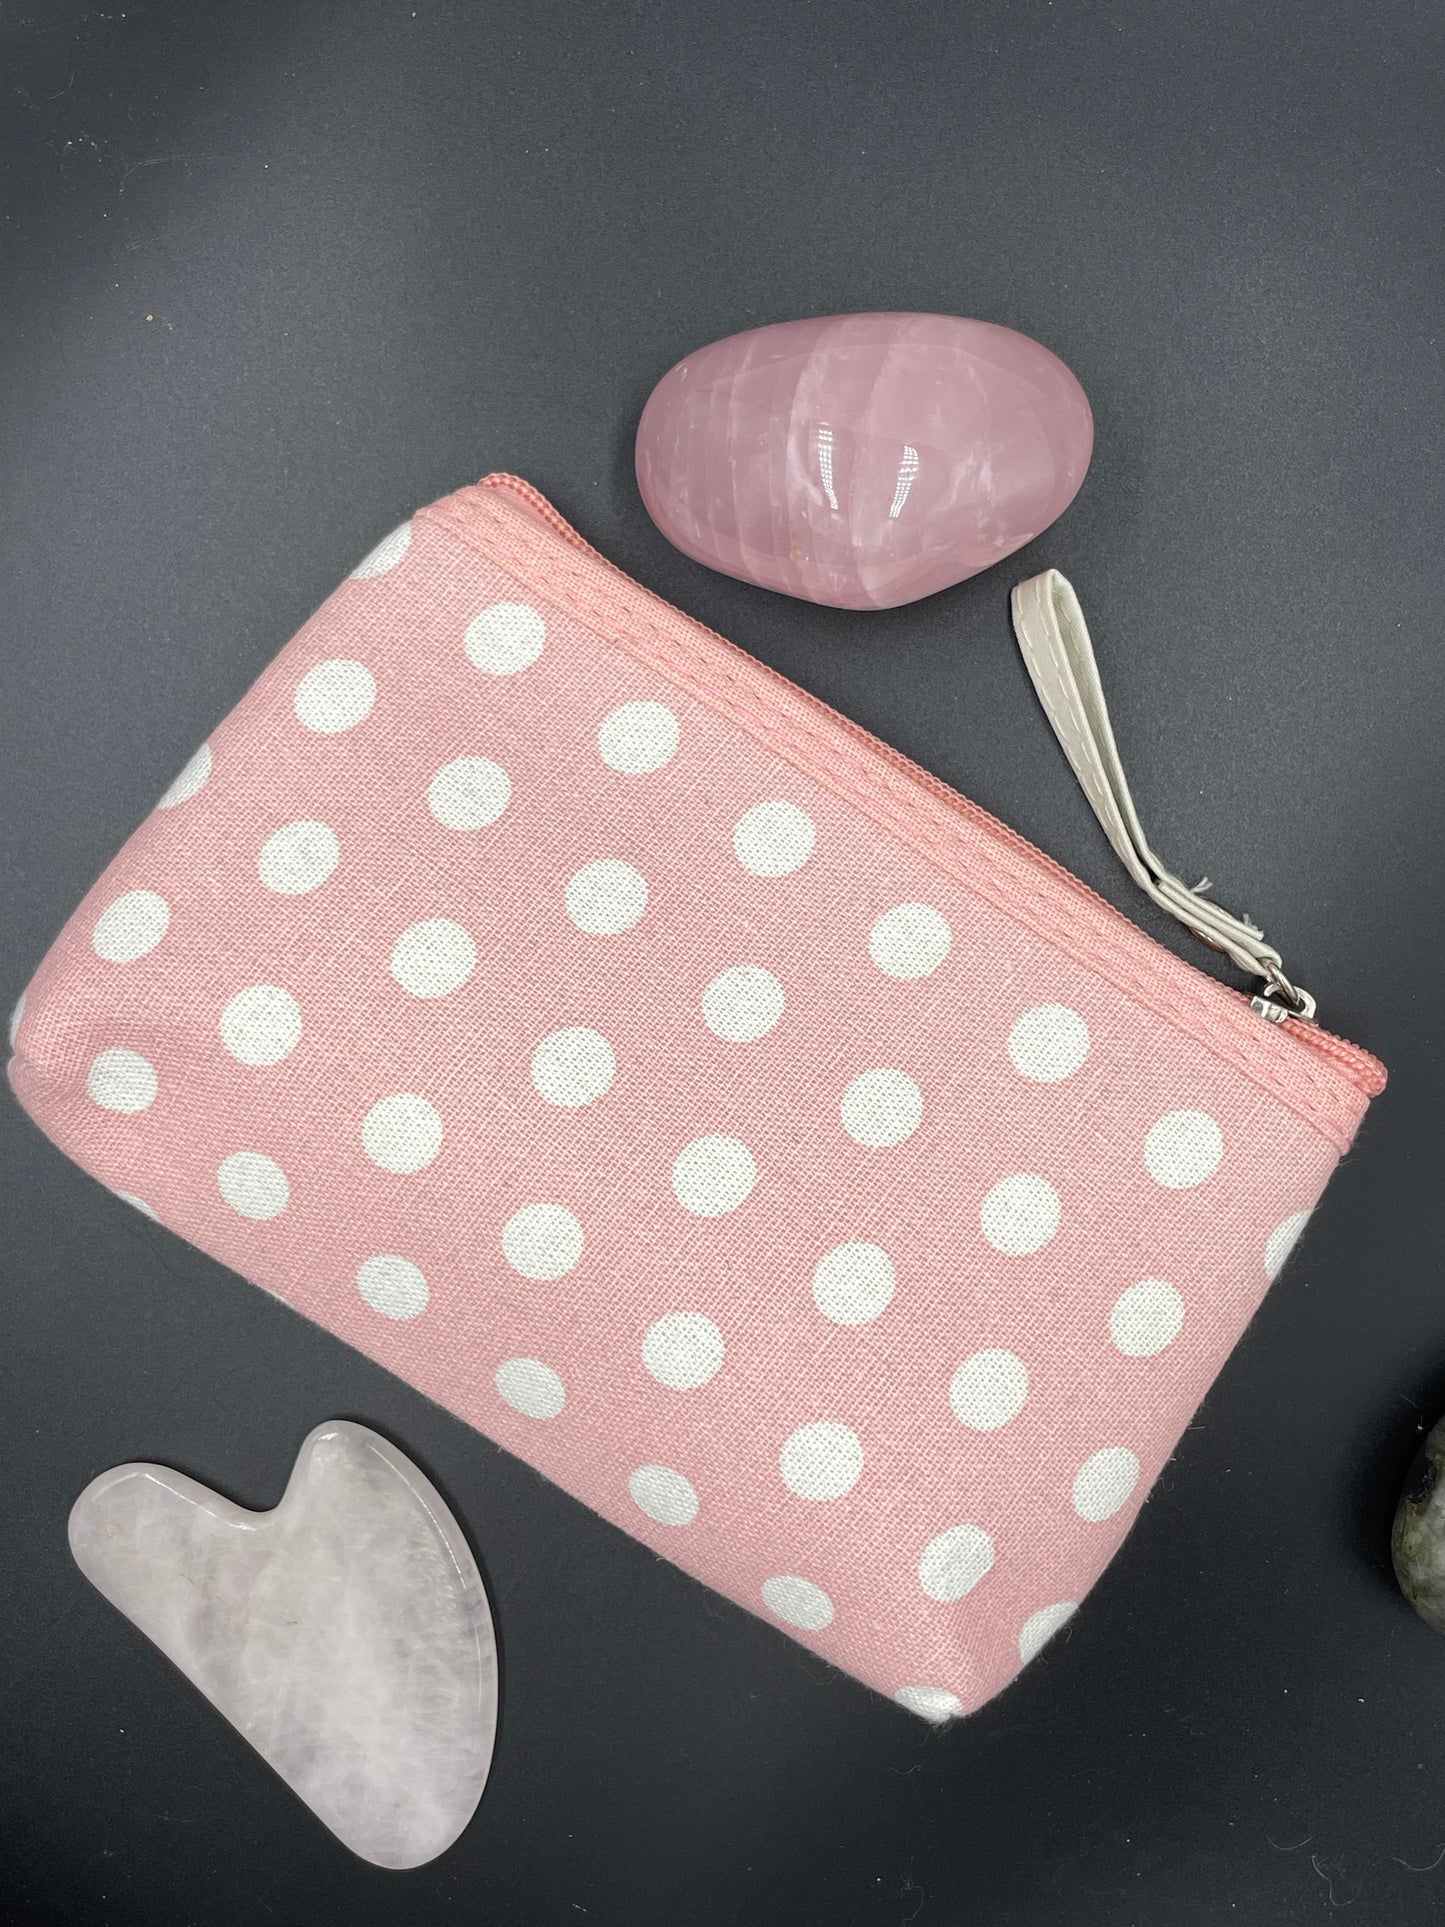 Makeup Bags - get one free with the purchase 3 or more cosmetic products